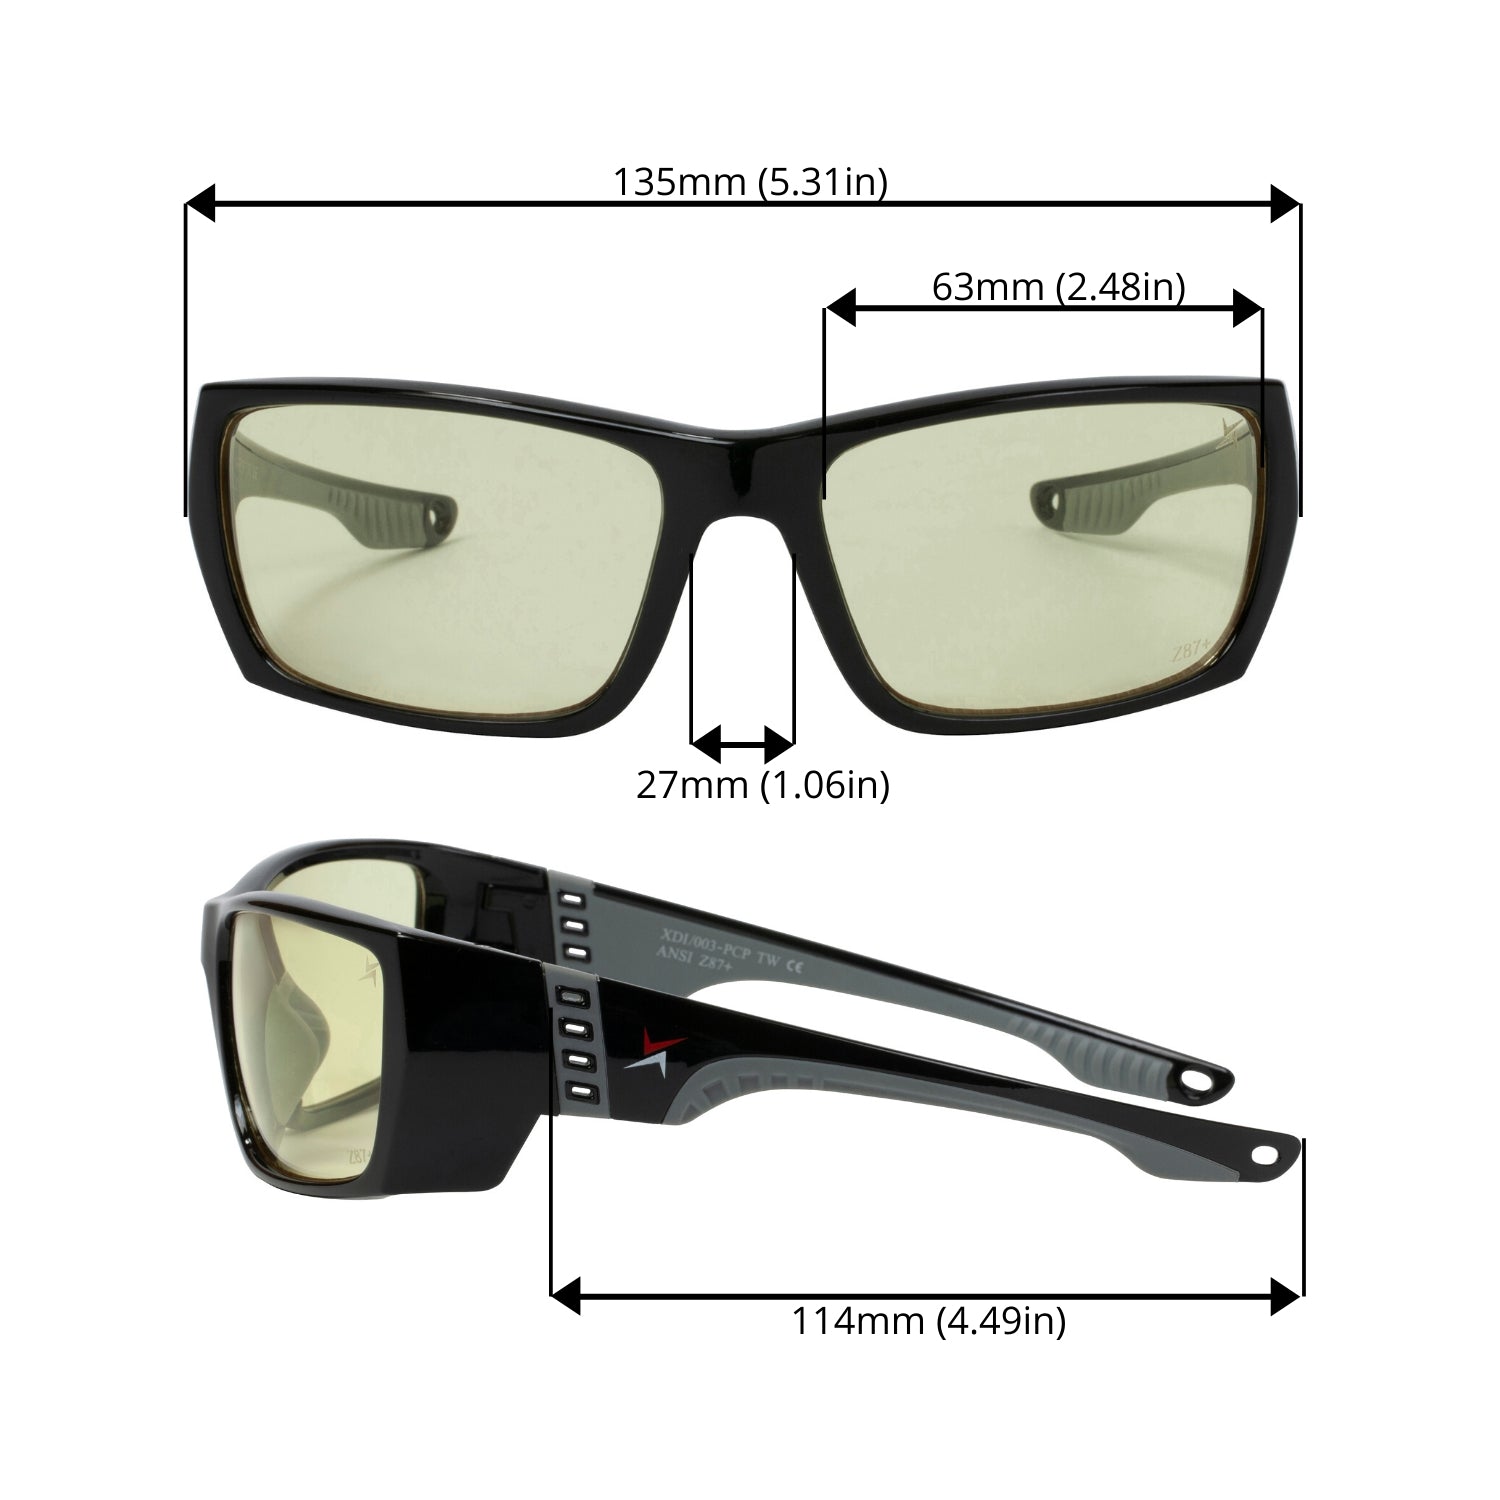 Yellow Tint Lens Sport Safety Sunglasses with Grey Rubber Accents.